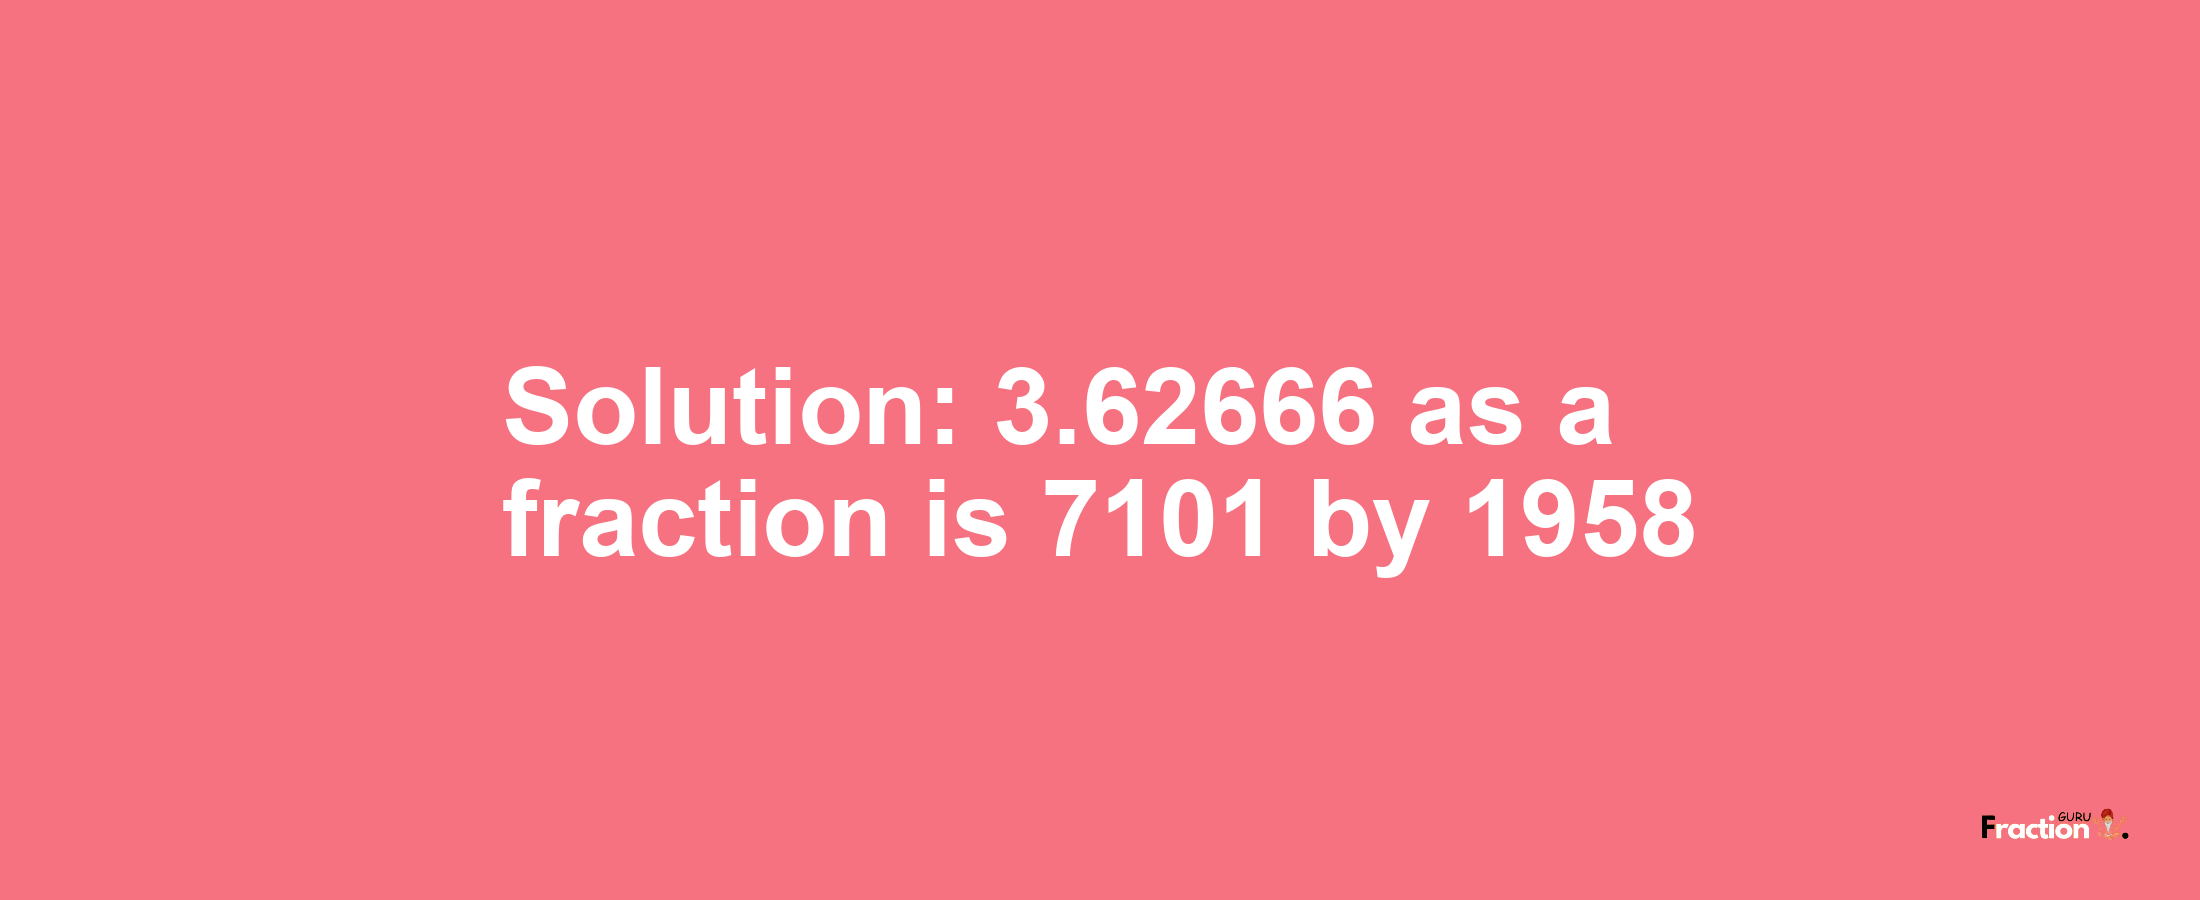 Solution:3.62666 as a fraction is 7101/1958